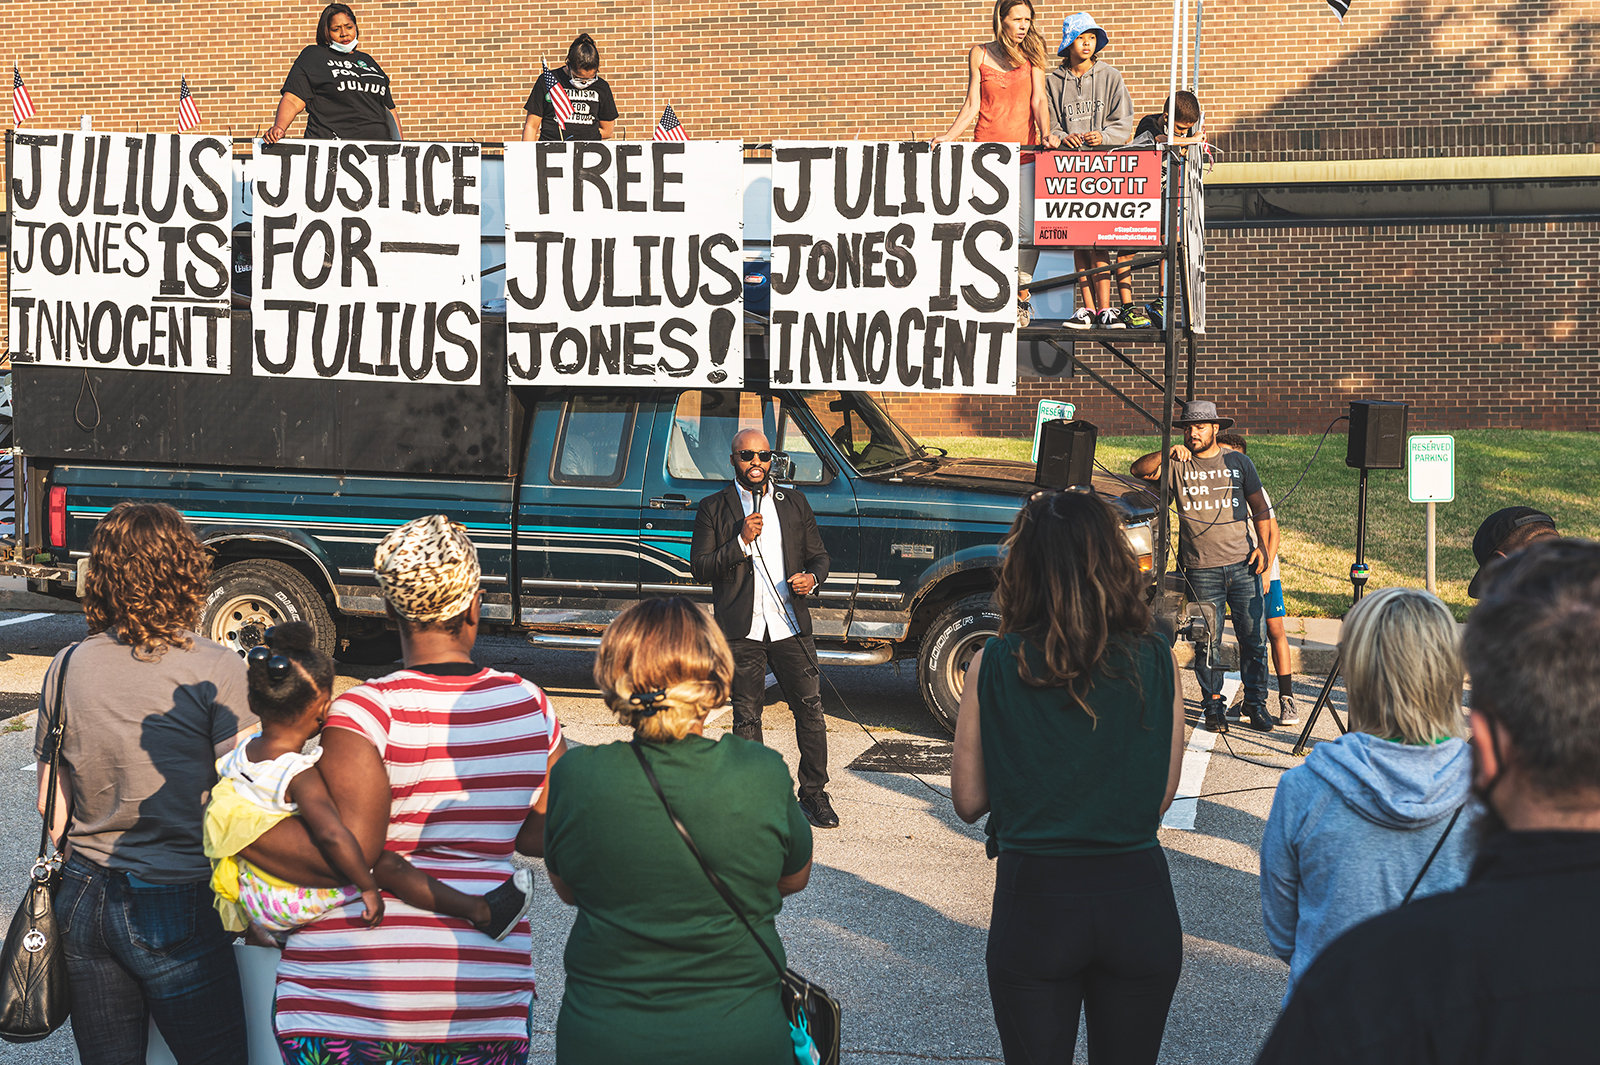 People attend a Justice for Julius Jones Commutation Hearing Rally in Oklahoma City on Sept. 13, 2021. Photo by Josh Dean Photography